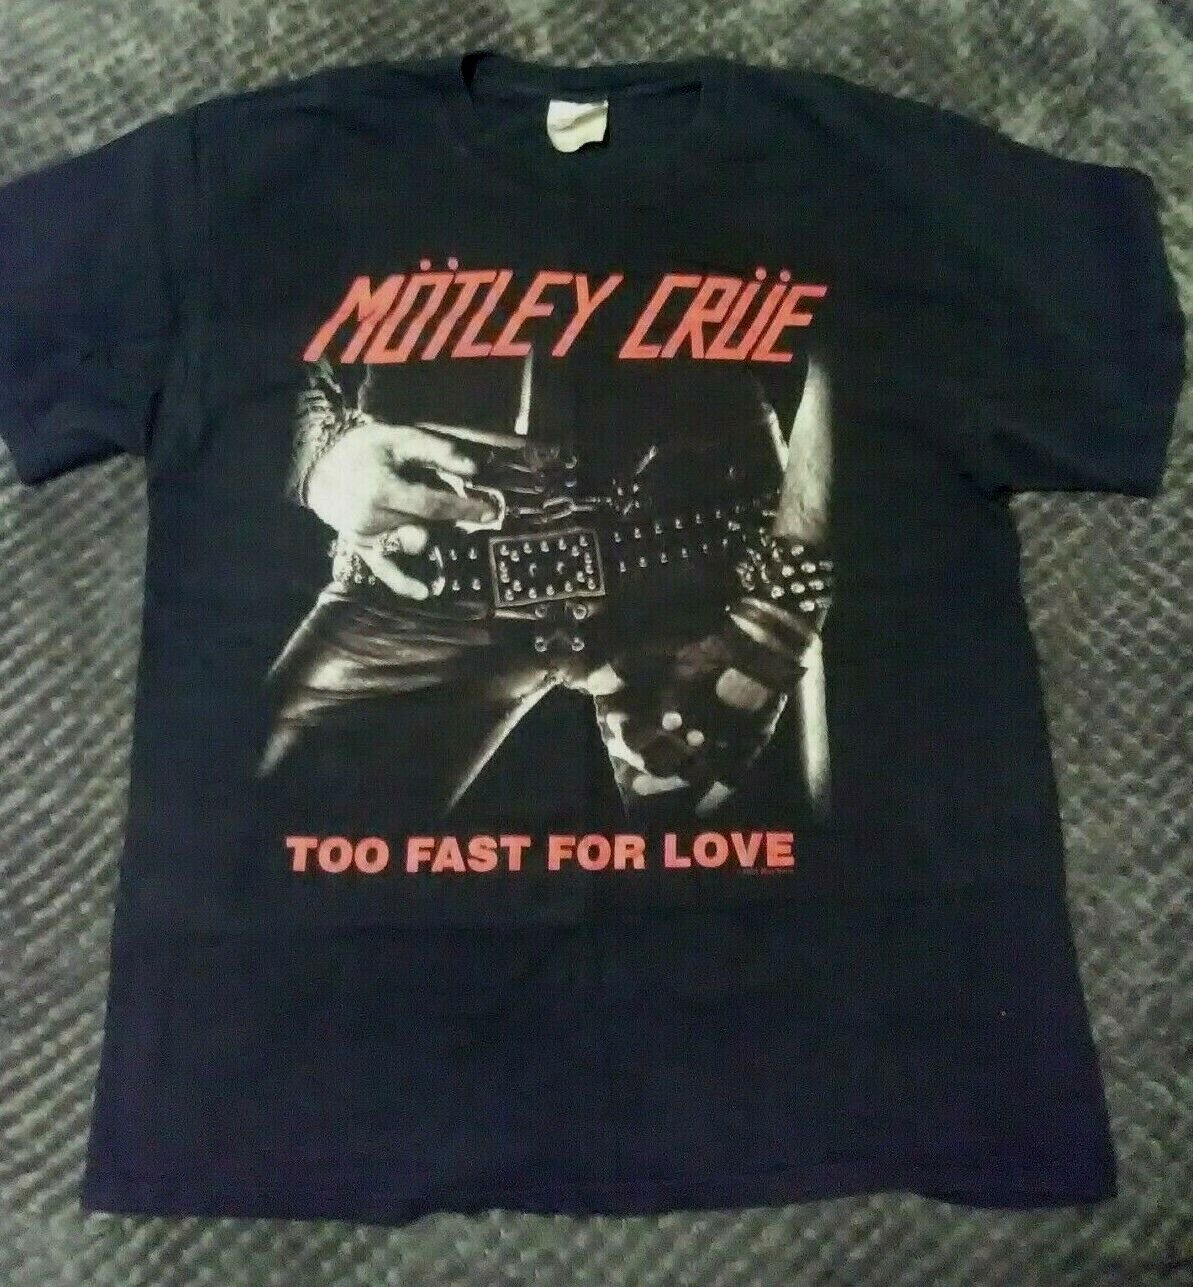 Motley Crue Too Fast For Love '81 Ron Toma Reissue (large) T-shirt